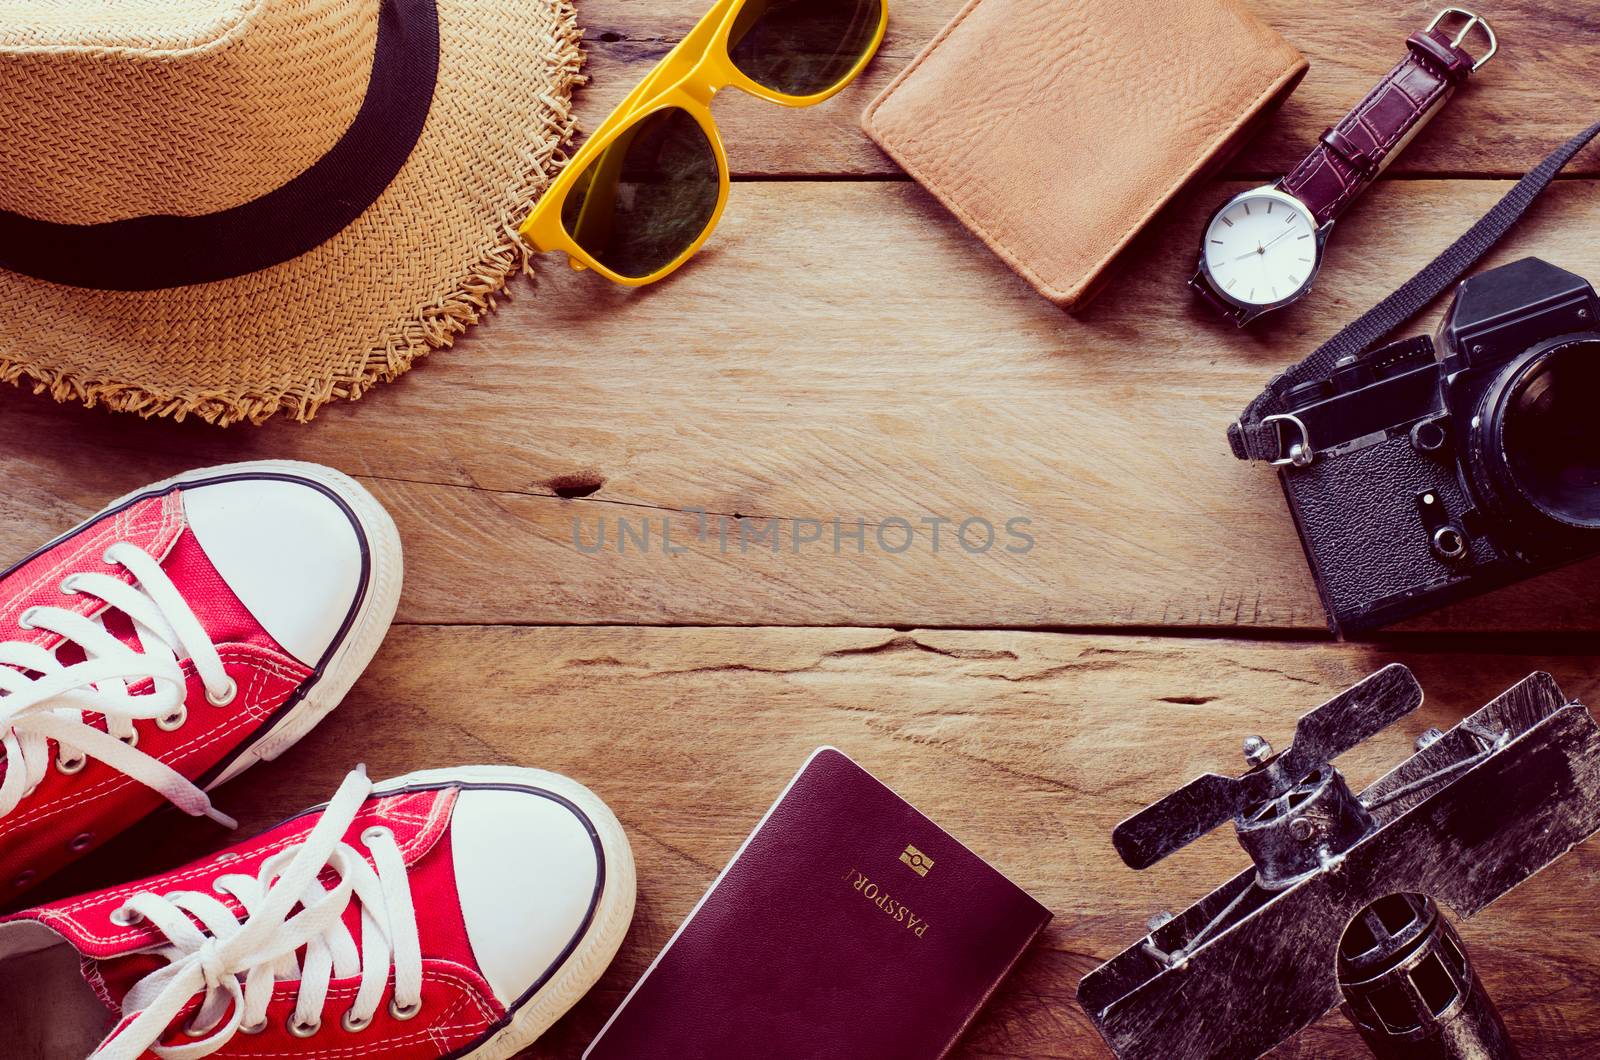 Travel accessories costumes. Passports, luggage, The cost of tra by photobyphotoboy